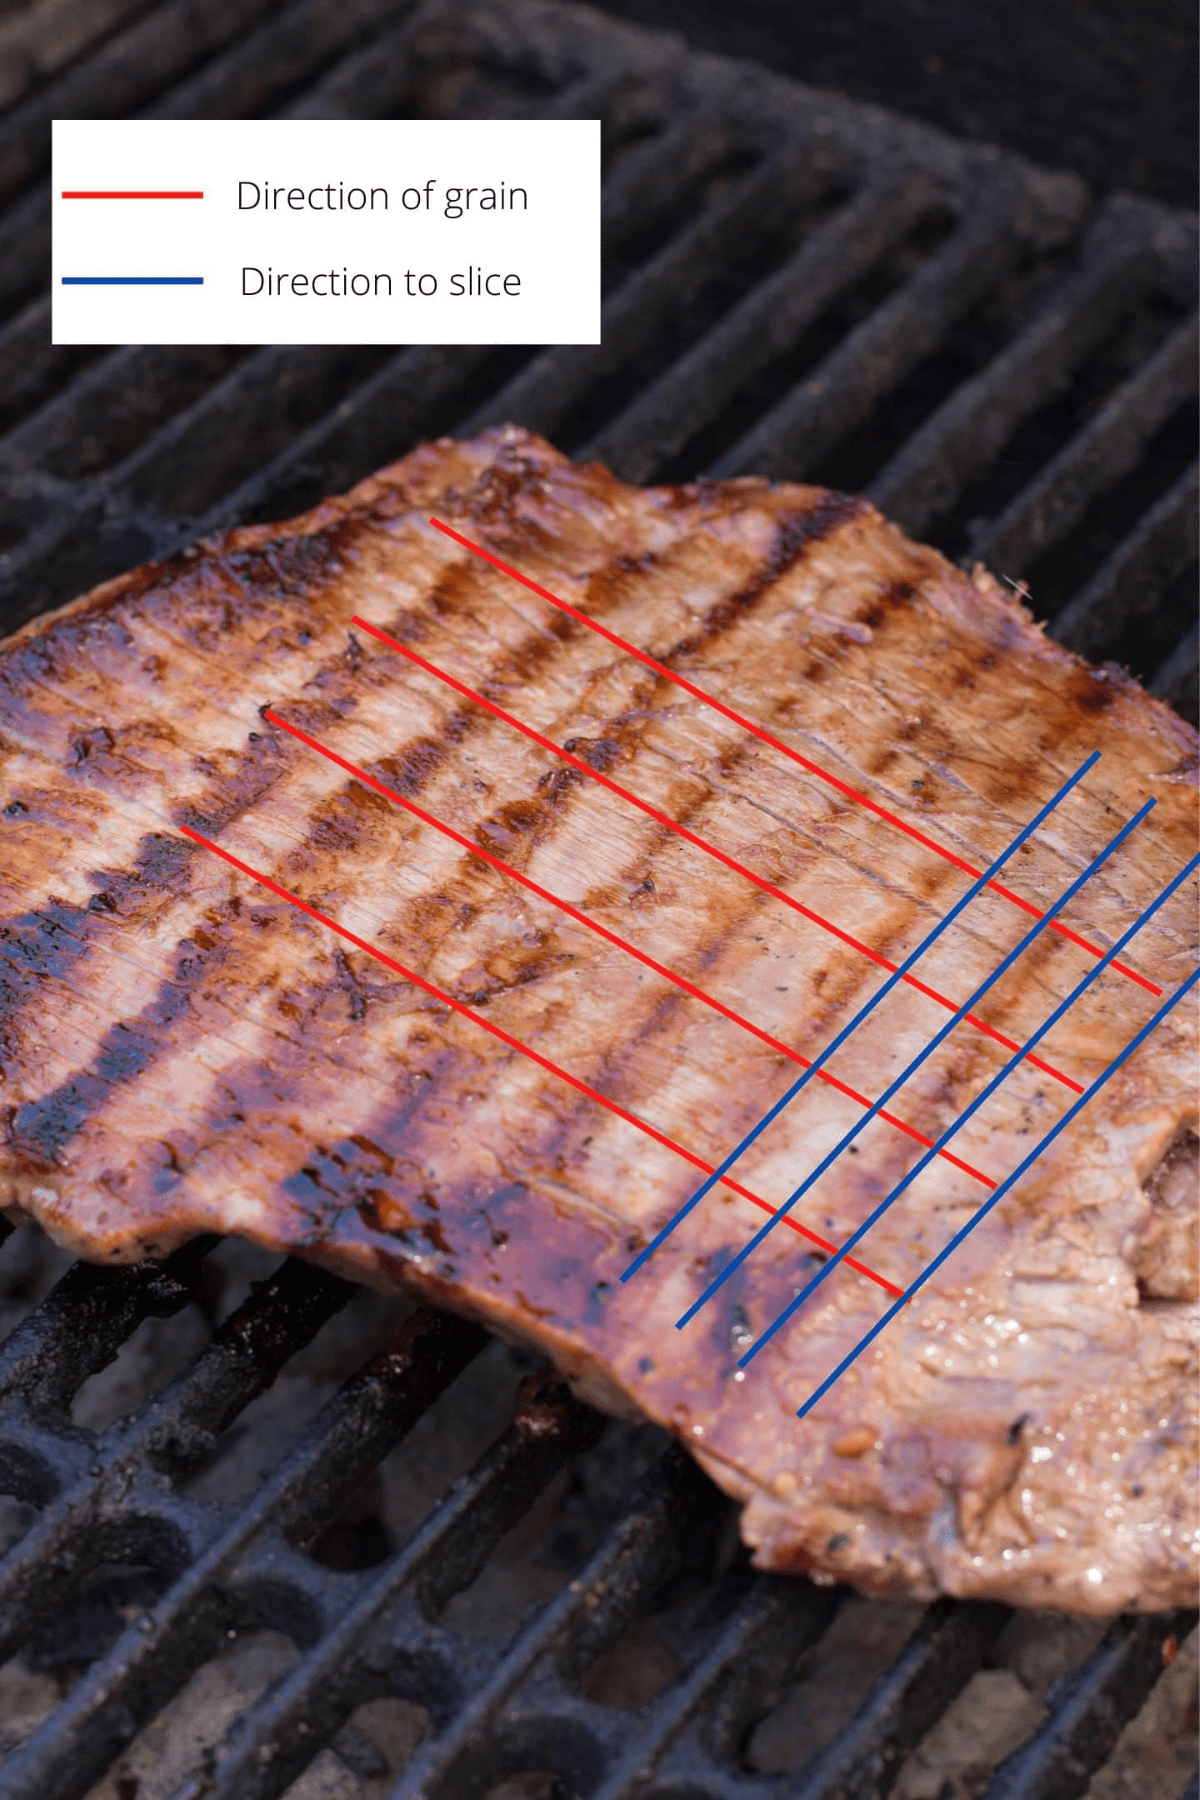 Flank steak on the grill with red and blue lines to show the grain of the meat and direction you should slice.